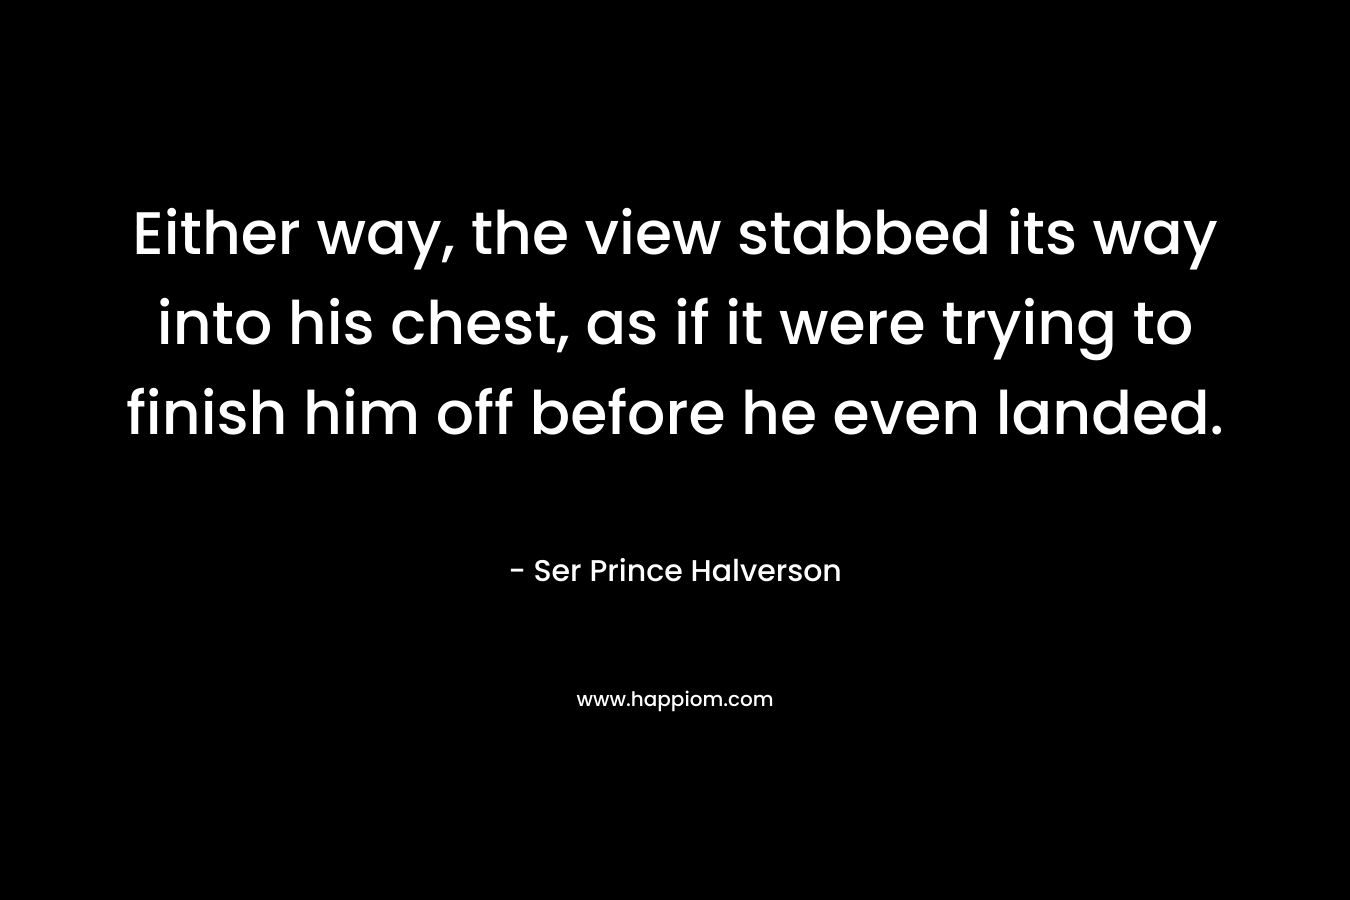 Either way, the view stabbed its way into his chest, as if it were trying to finish him off before he even landed.